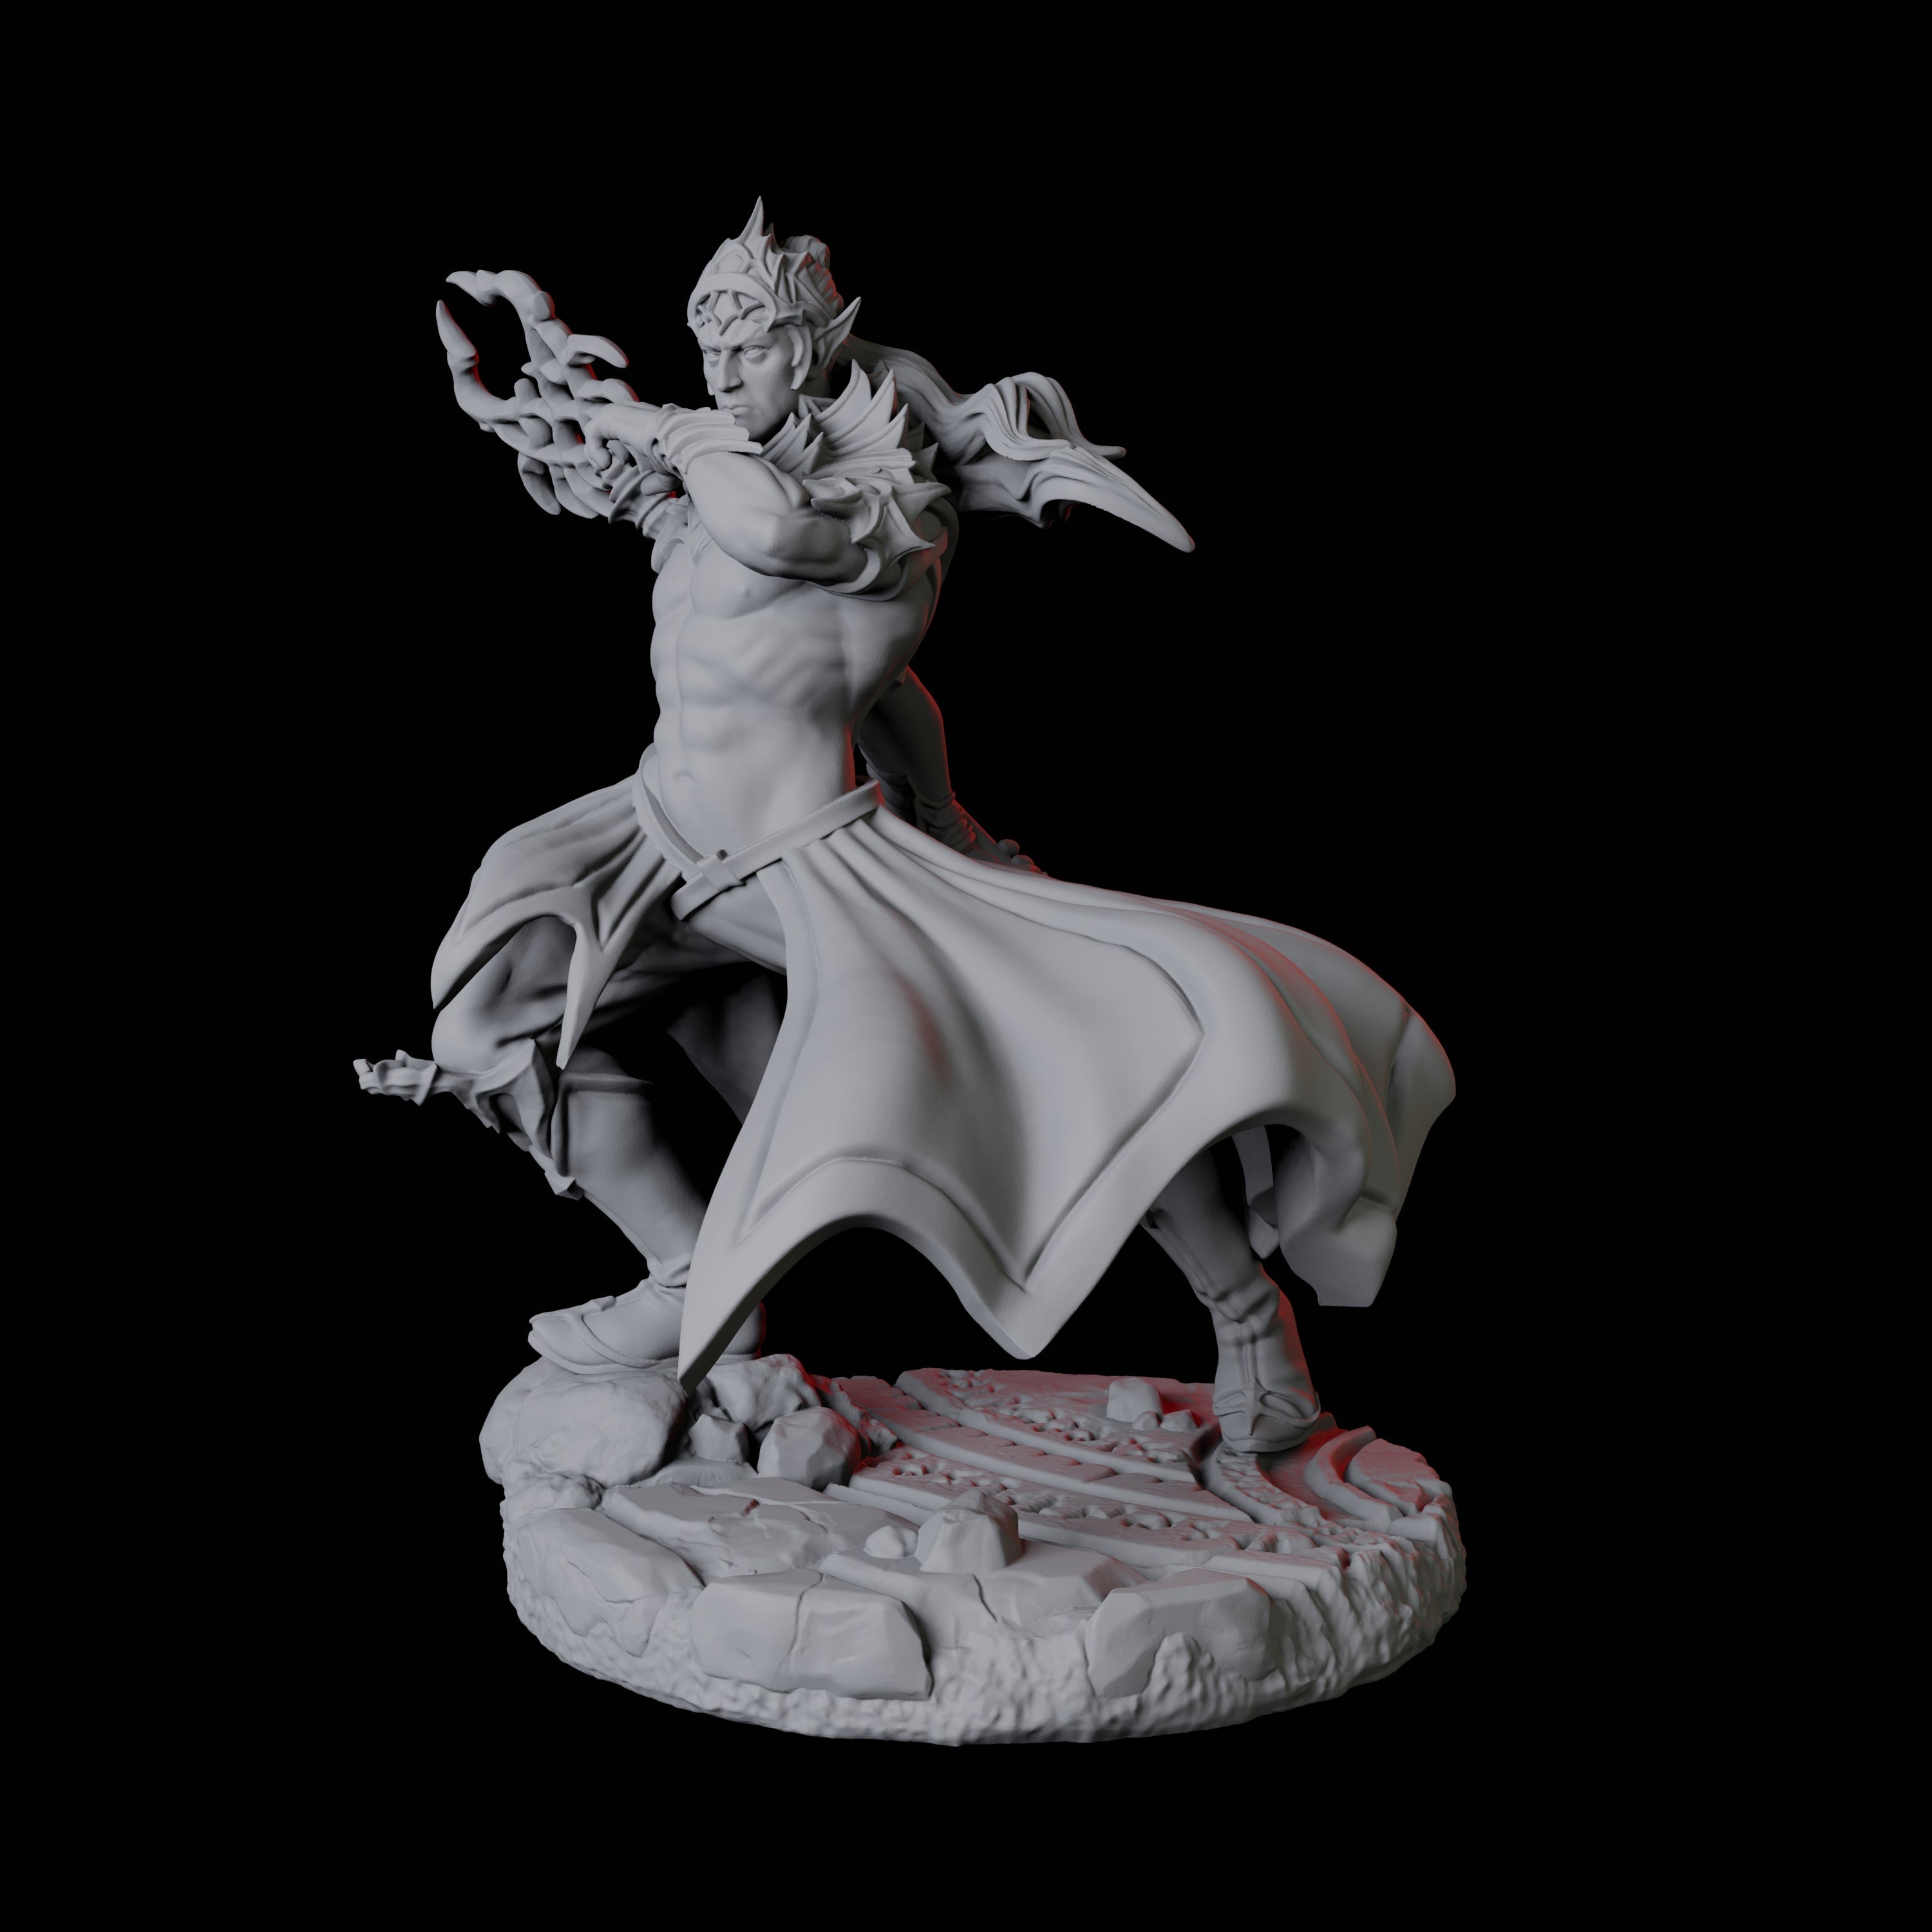 Mage Adept A Miniature for Dungeons and Dragons, Pathfinder or other TTRPGs